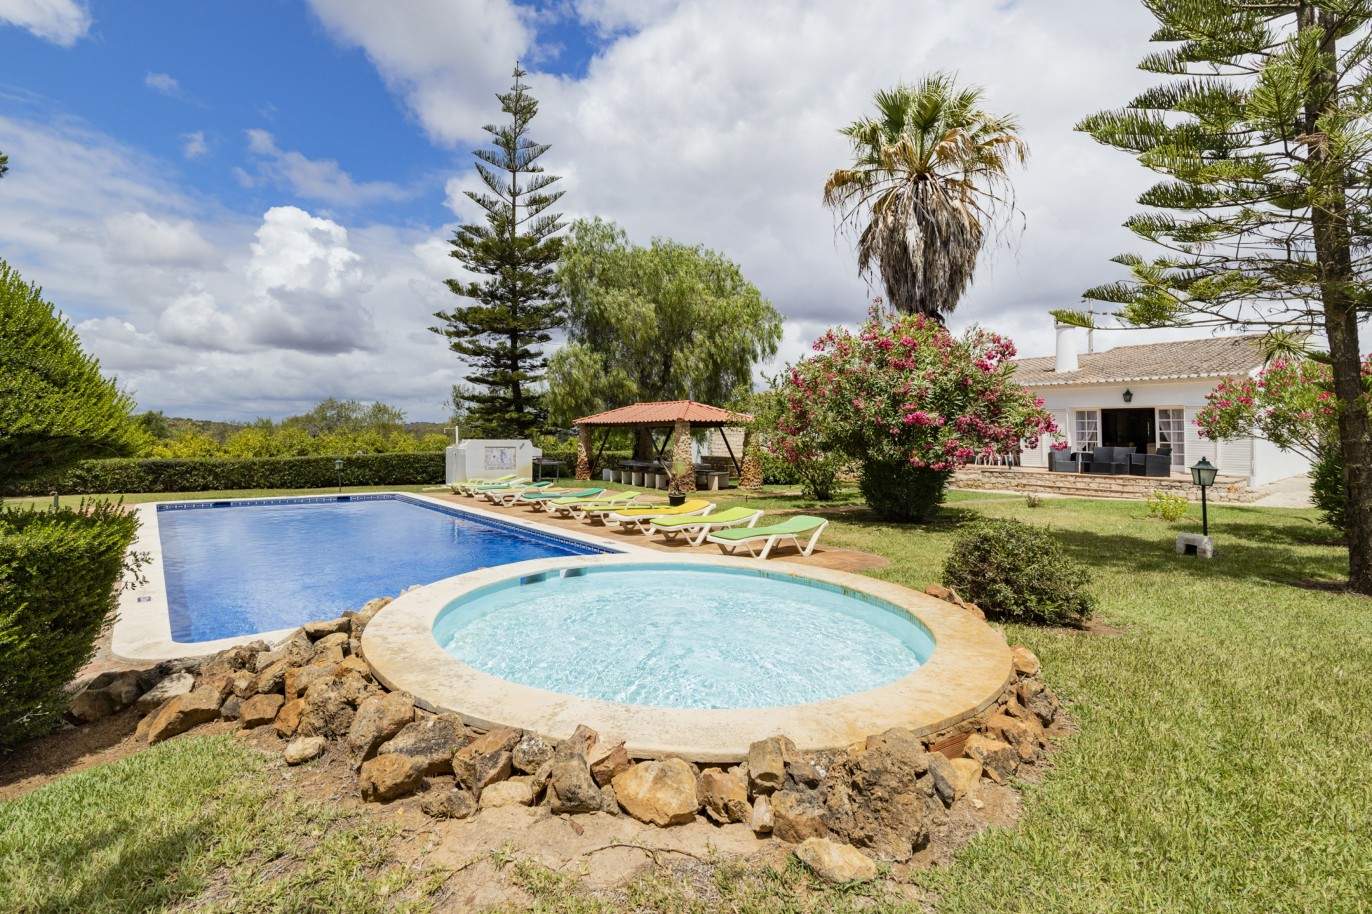 Rustic 5 bedrooms villa with pool and orchard, for sale in Pêra, Algarve_201832